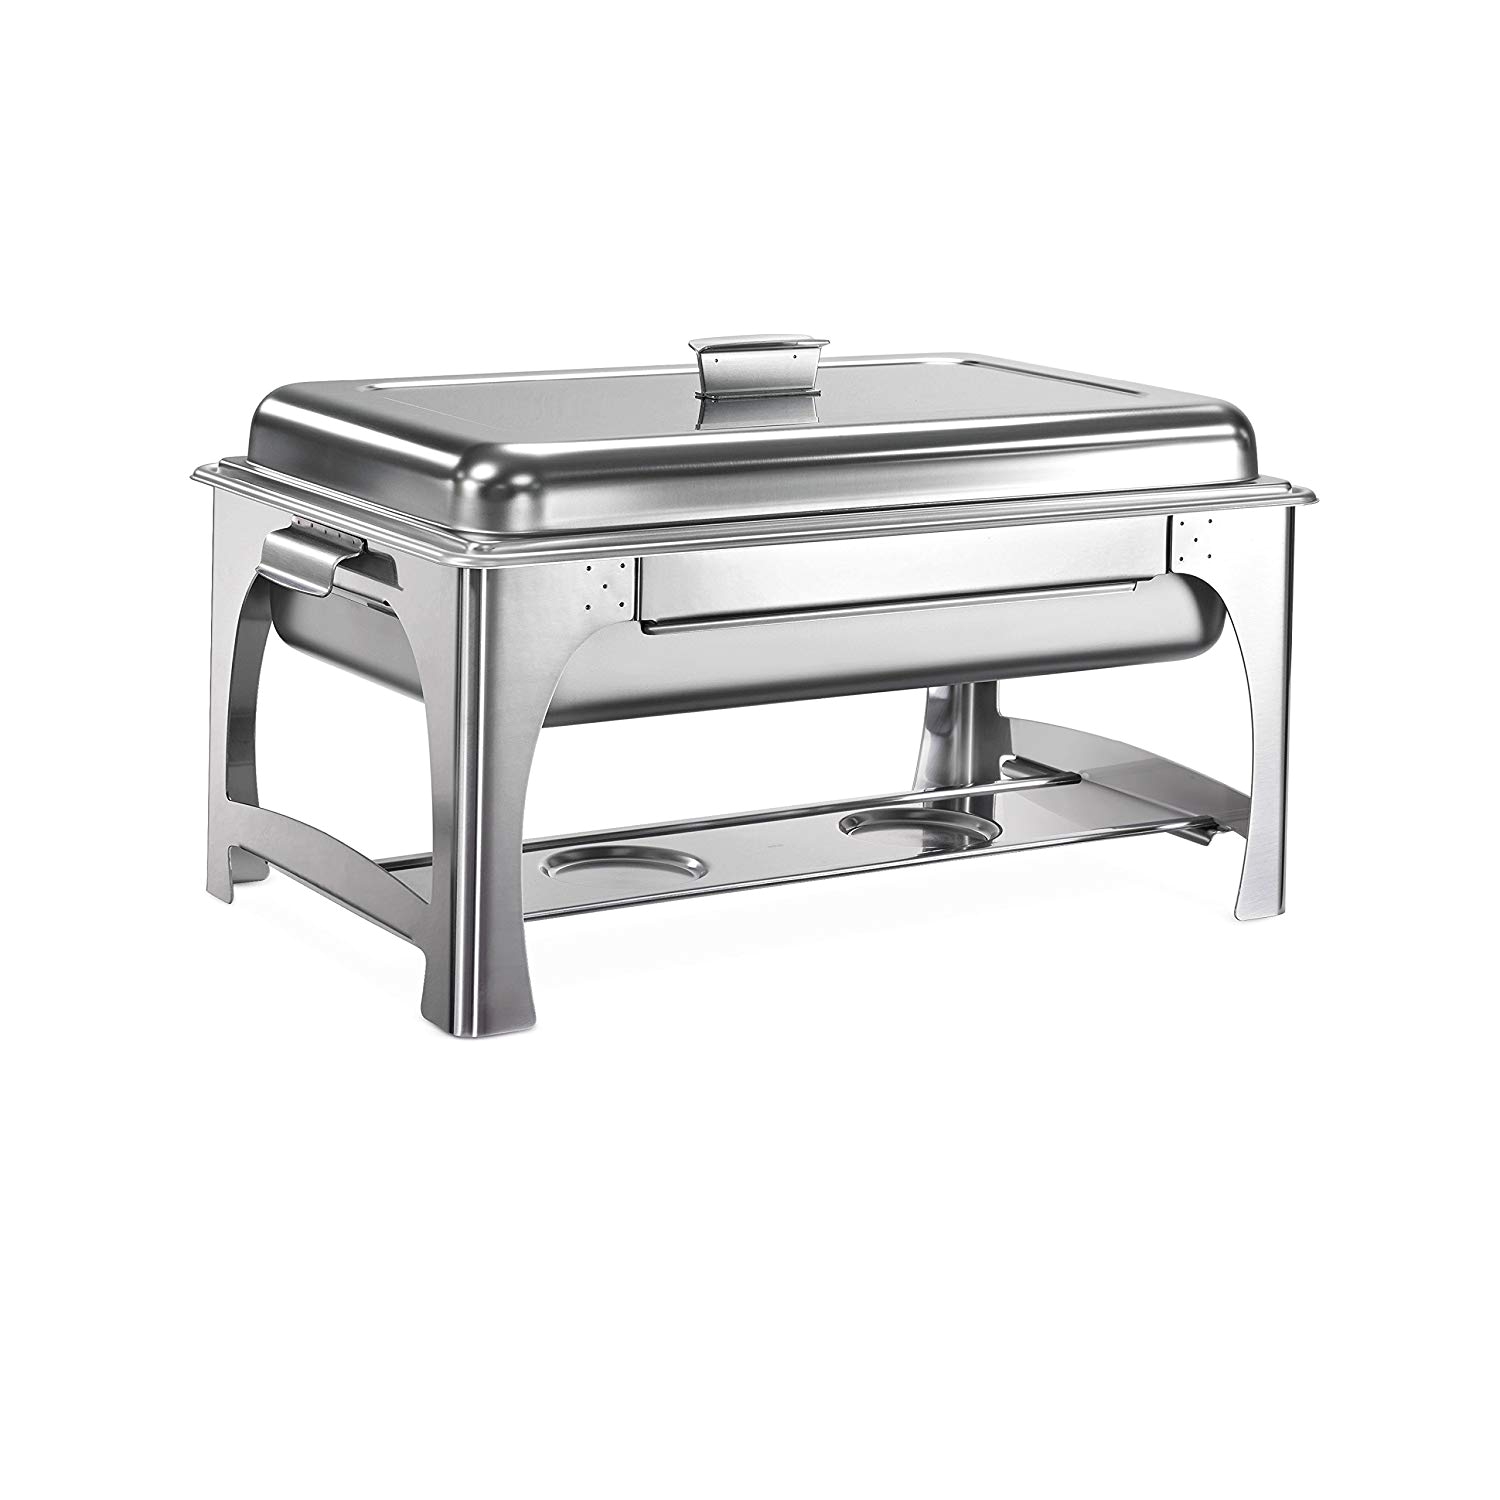 Wire Chafing Dish Rack Bjs Amazon Com Chafing Dishes Home Kitchen